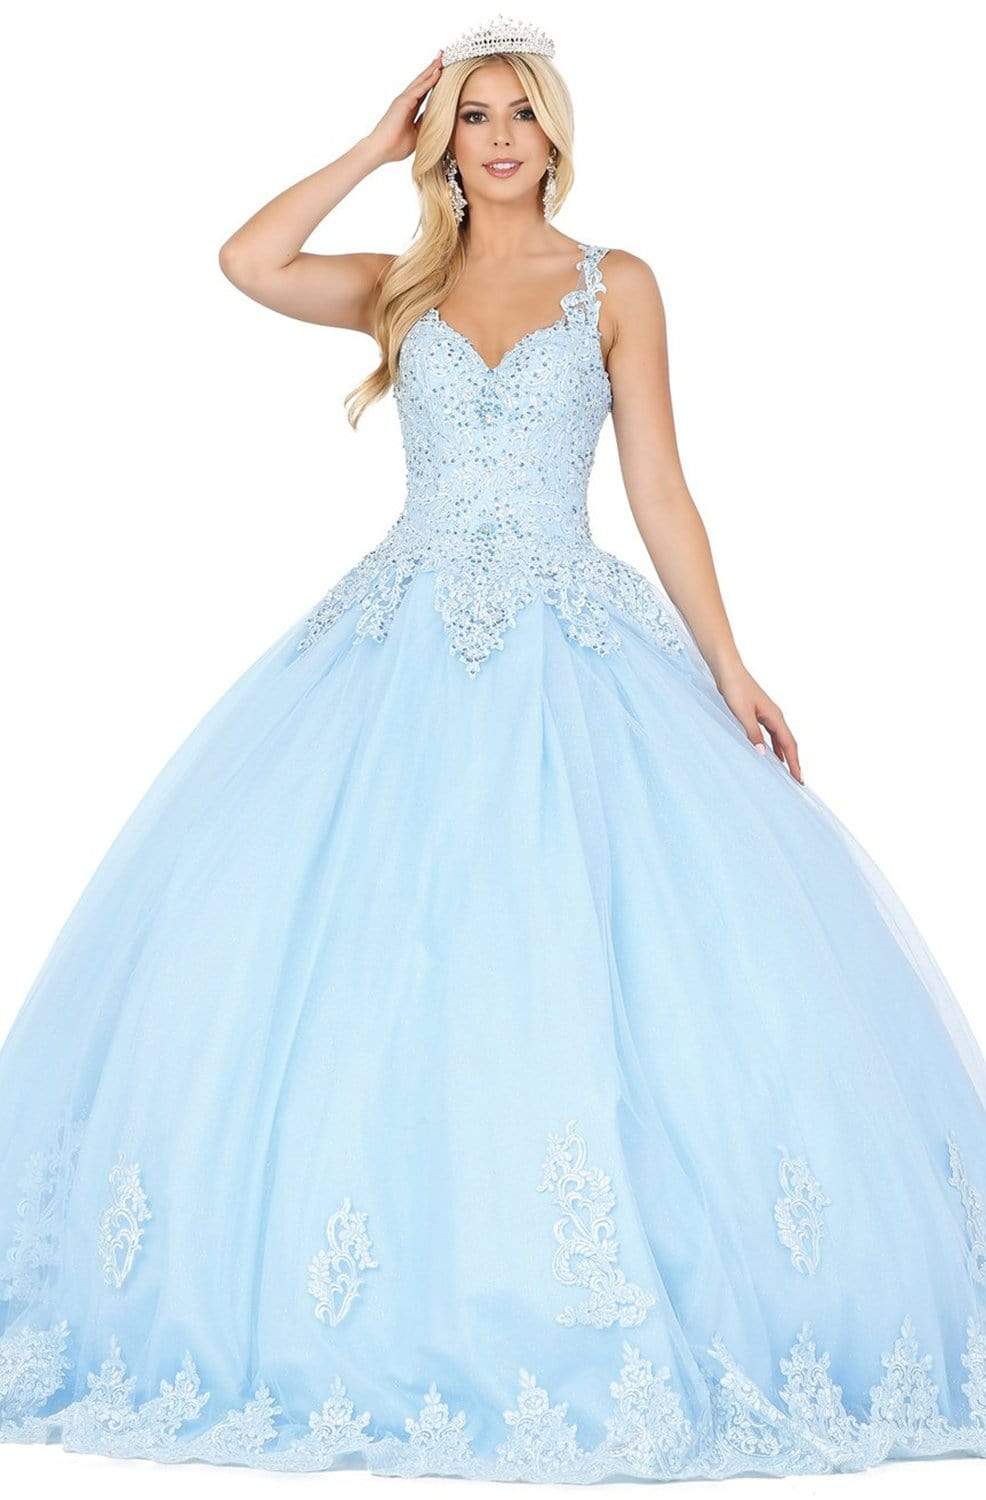 Dancing Queen - 1411 Embroidered Sweetheart Bodice Ballgown Quinceanera Dresses XS / Bahama Blue